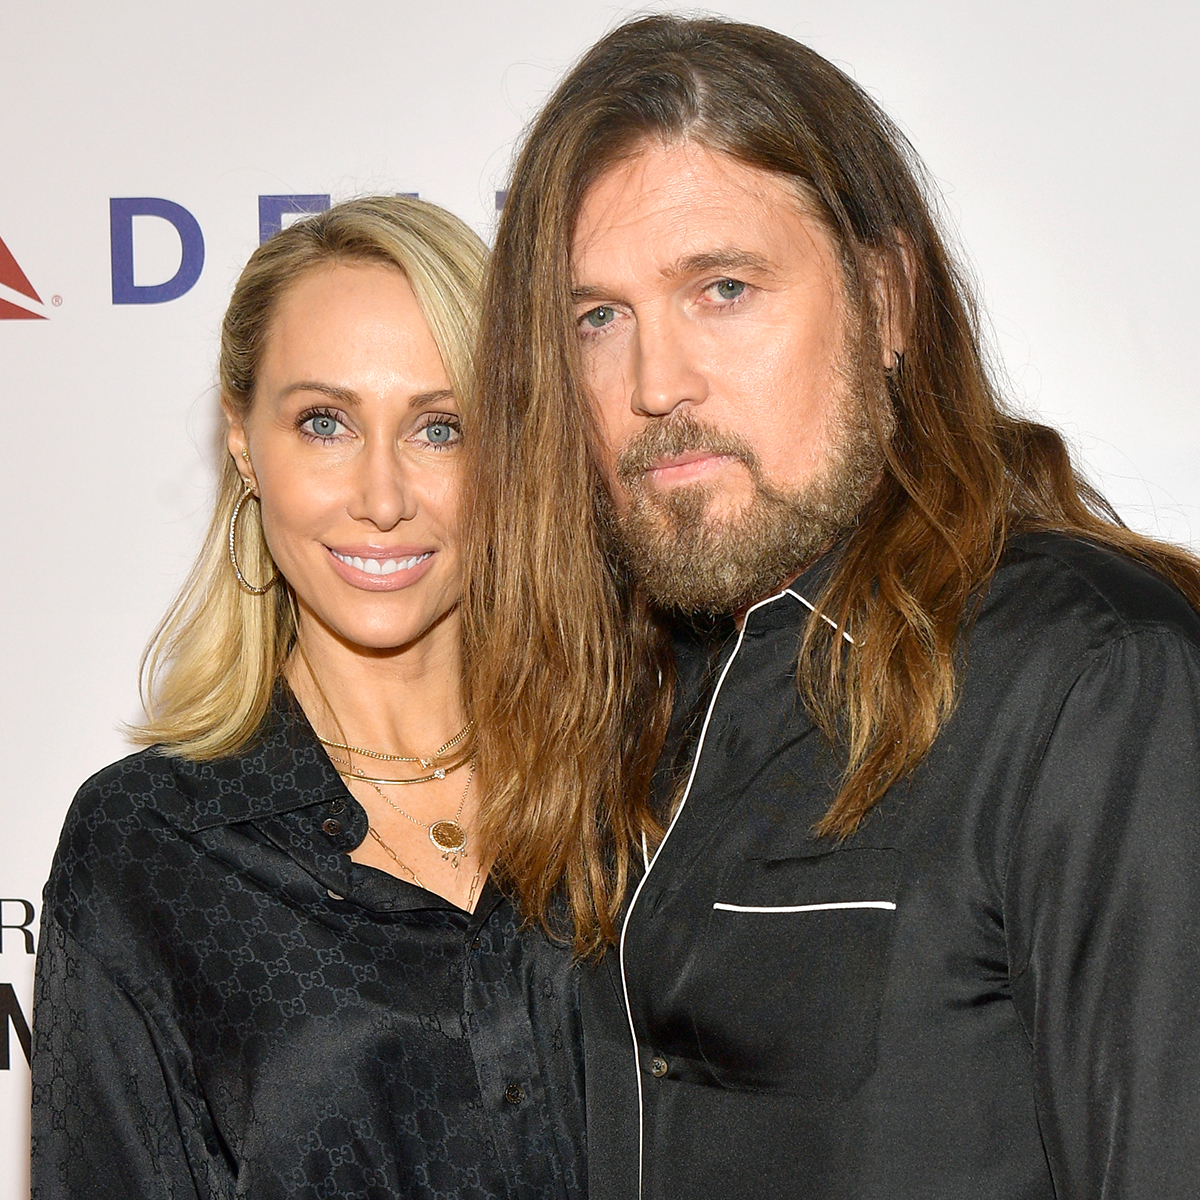 Tish Cyrus files for divorce from Billy Ray Cyrus after 28 year